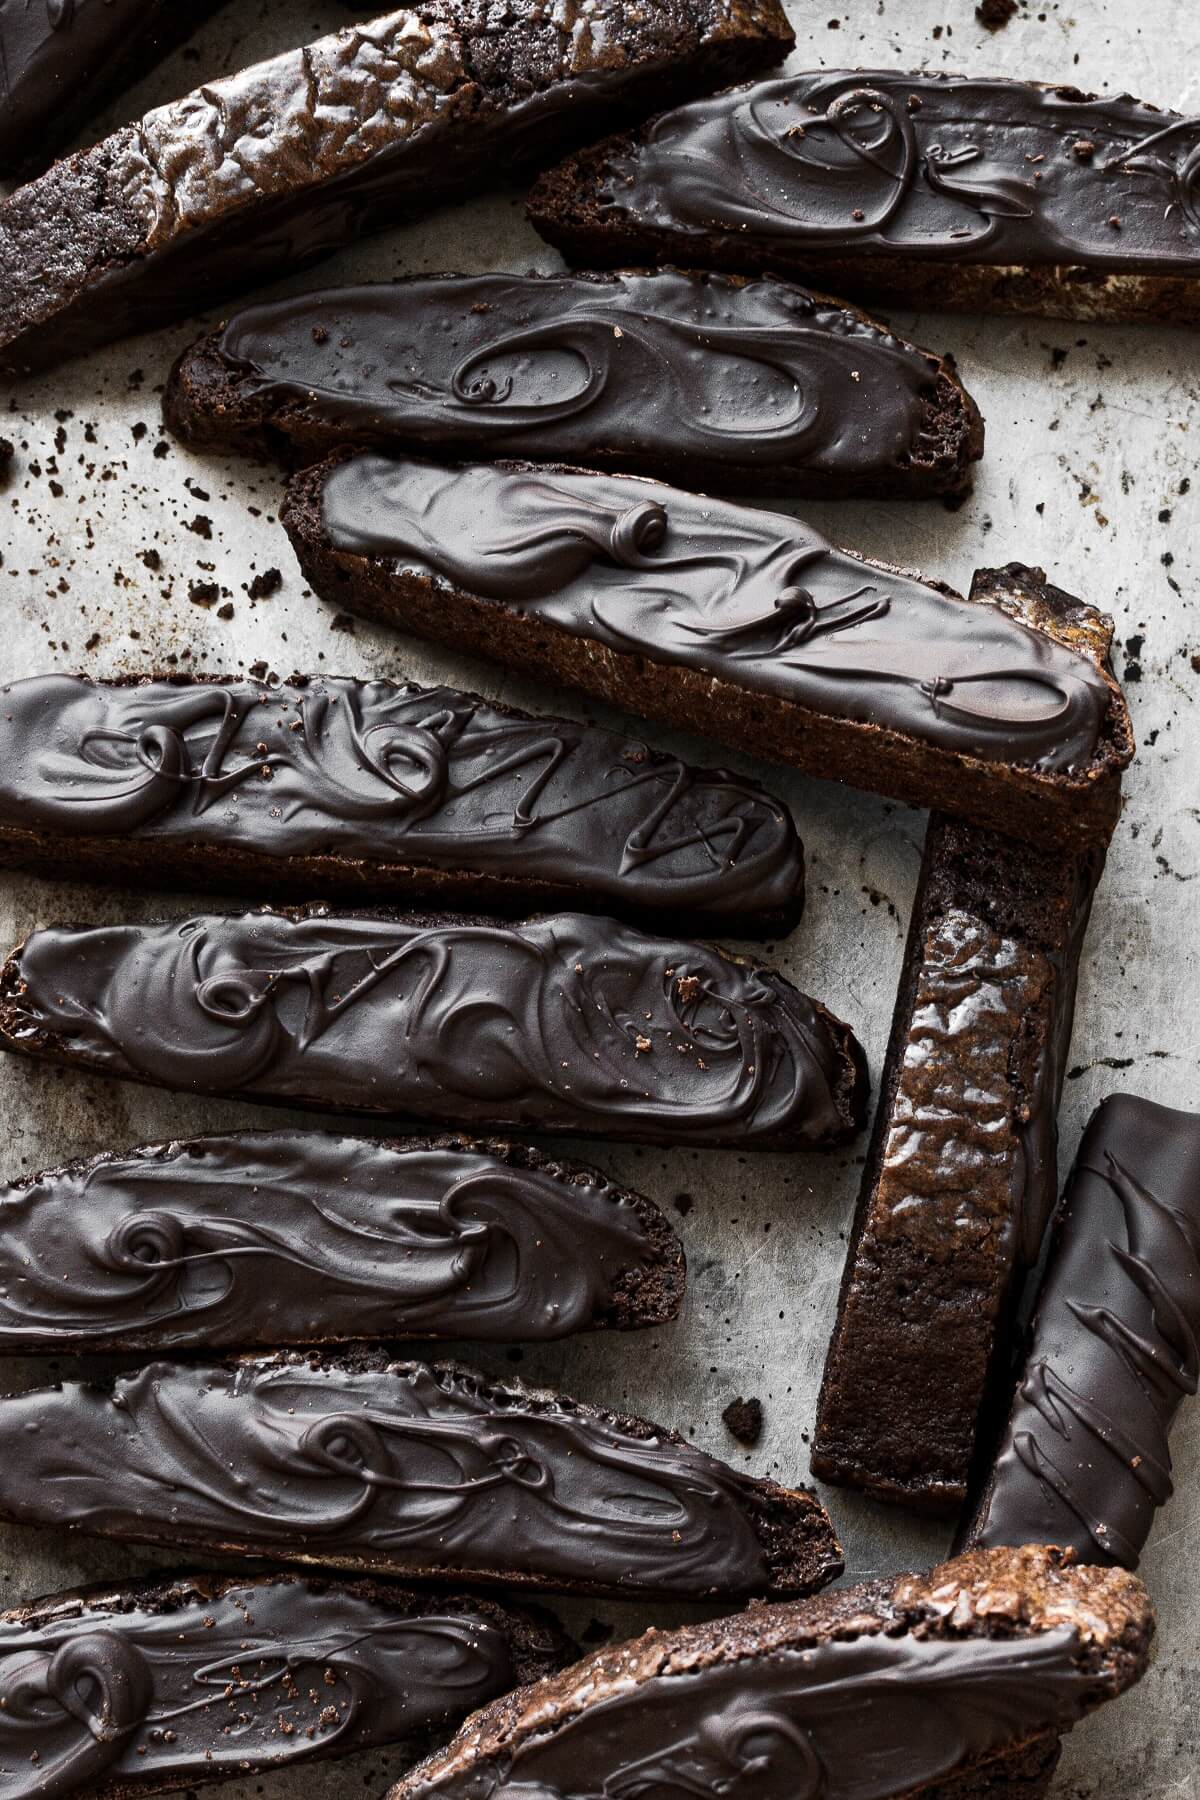 Chocolate biscotti spread with melted chocolate arranged on a baking sheet.